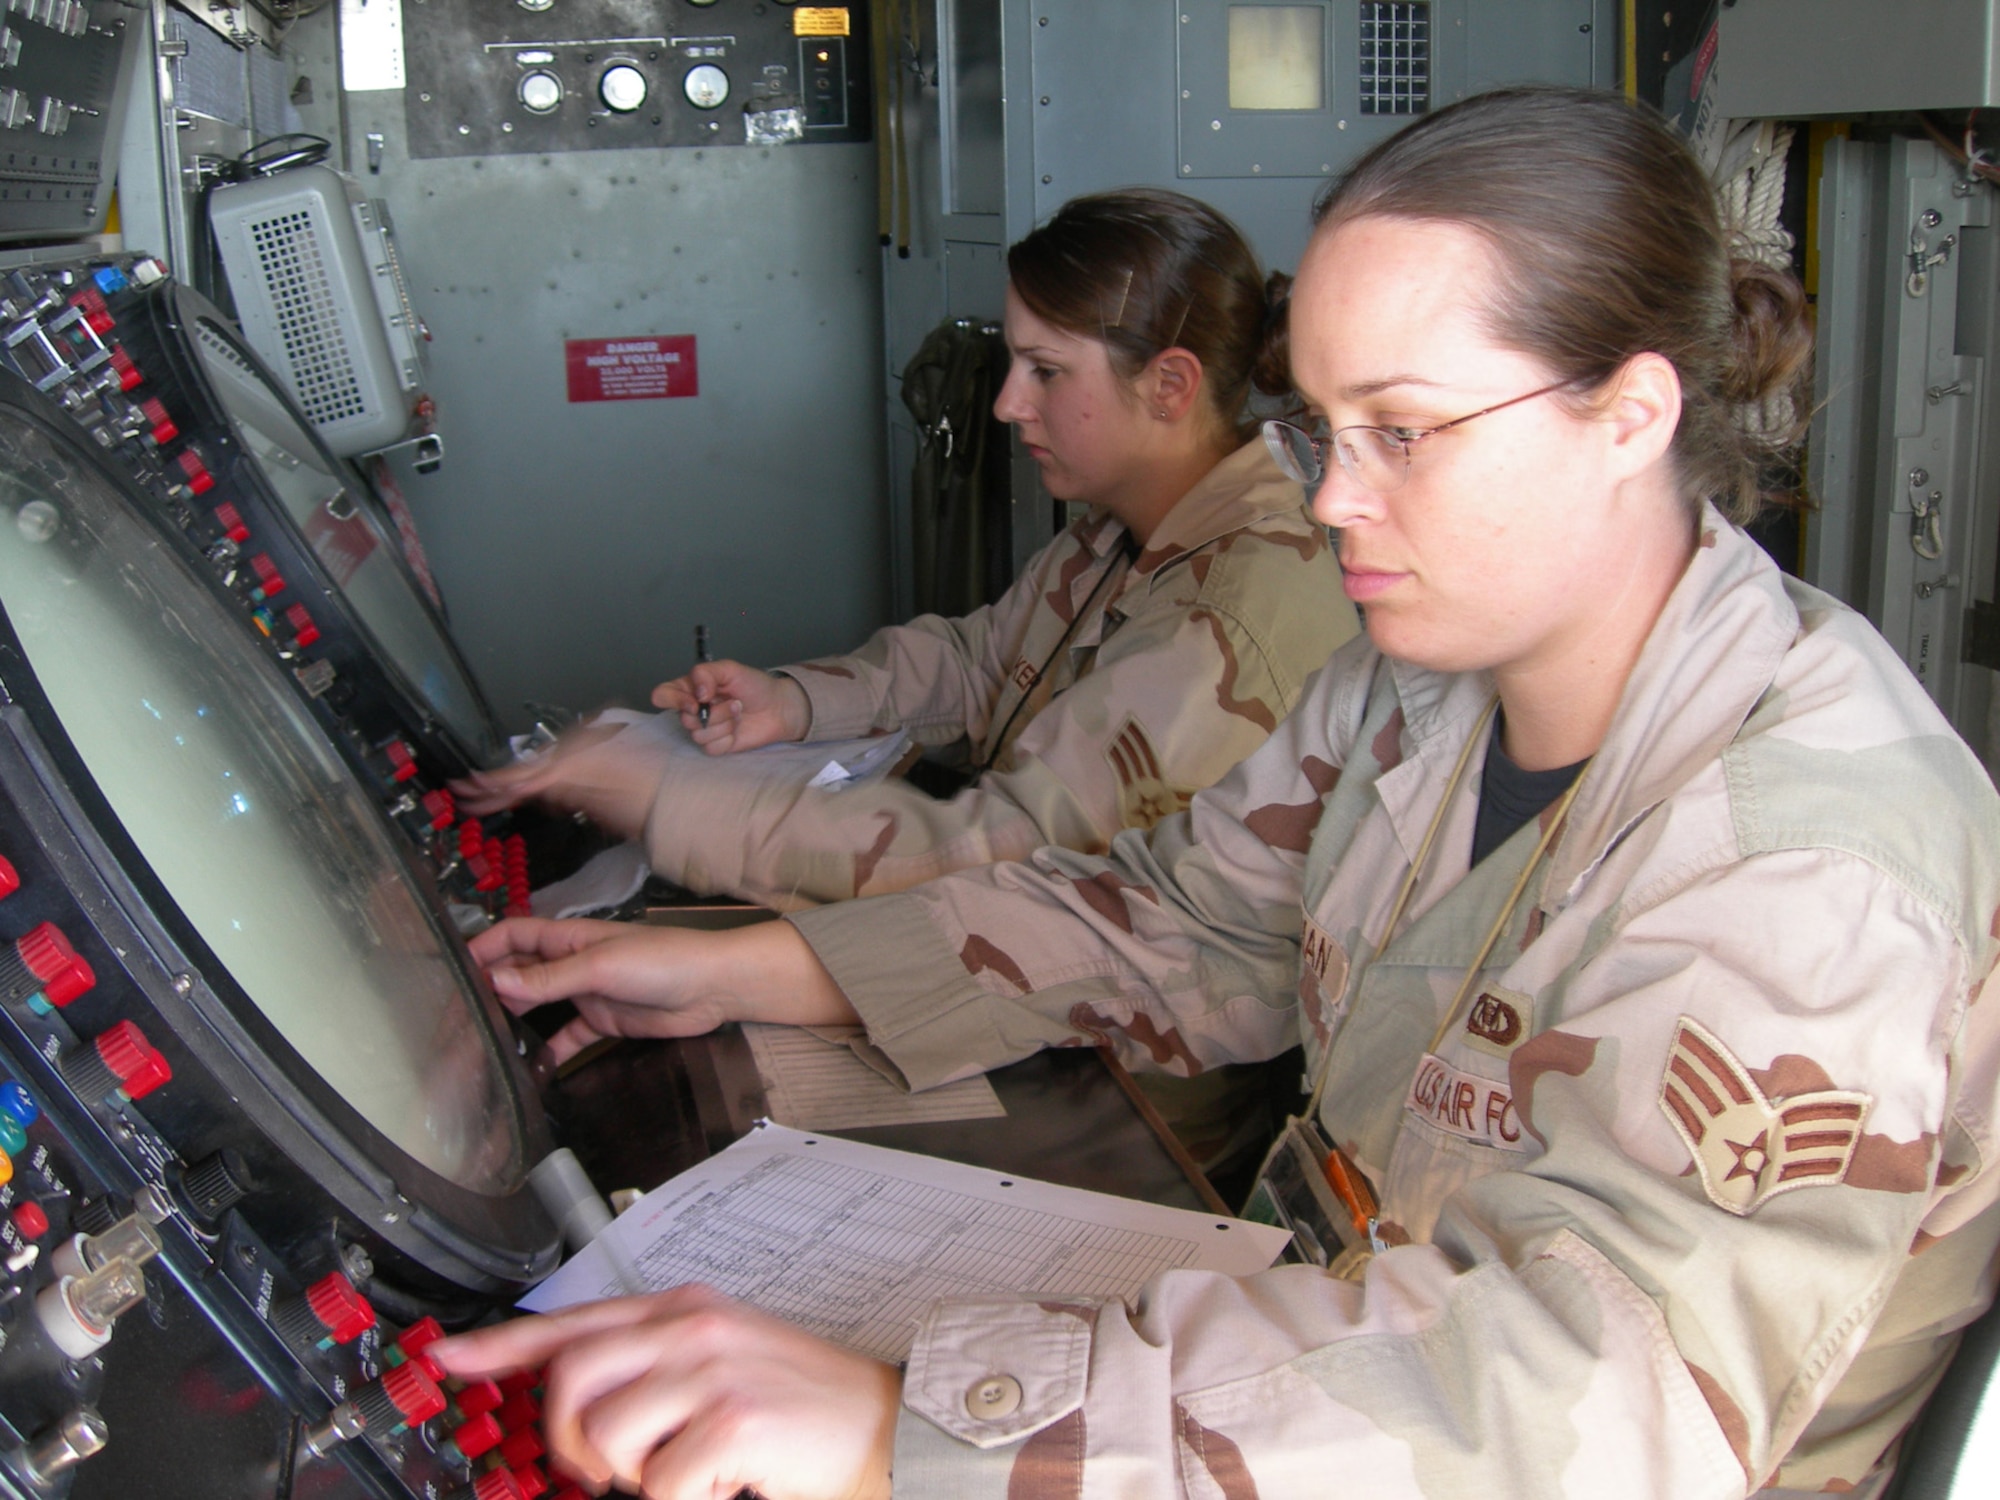 Balad Air Base, Iraq - Senior Airmen Amanda Hoffman and Rebekka Baker conduct an operational check of a AN/TPS-75 radar system at Balad Air Base, Iraq. Both Airmen are assigned to the 727th Expeditionary Air Control Squadron (EACS) and are deployed from the 728th Air Control Squadron at Eglin Air Force Base, Fla. Also known as Kingpin, the 727th EACS is responsible for maintaining positive control over aircraft operating in Iraq's 277,000 miles of airspace. (U.S. Air Force photo/Major Damien Pickart)           